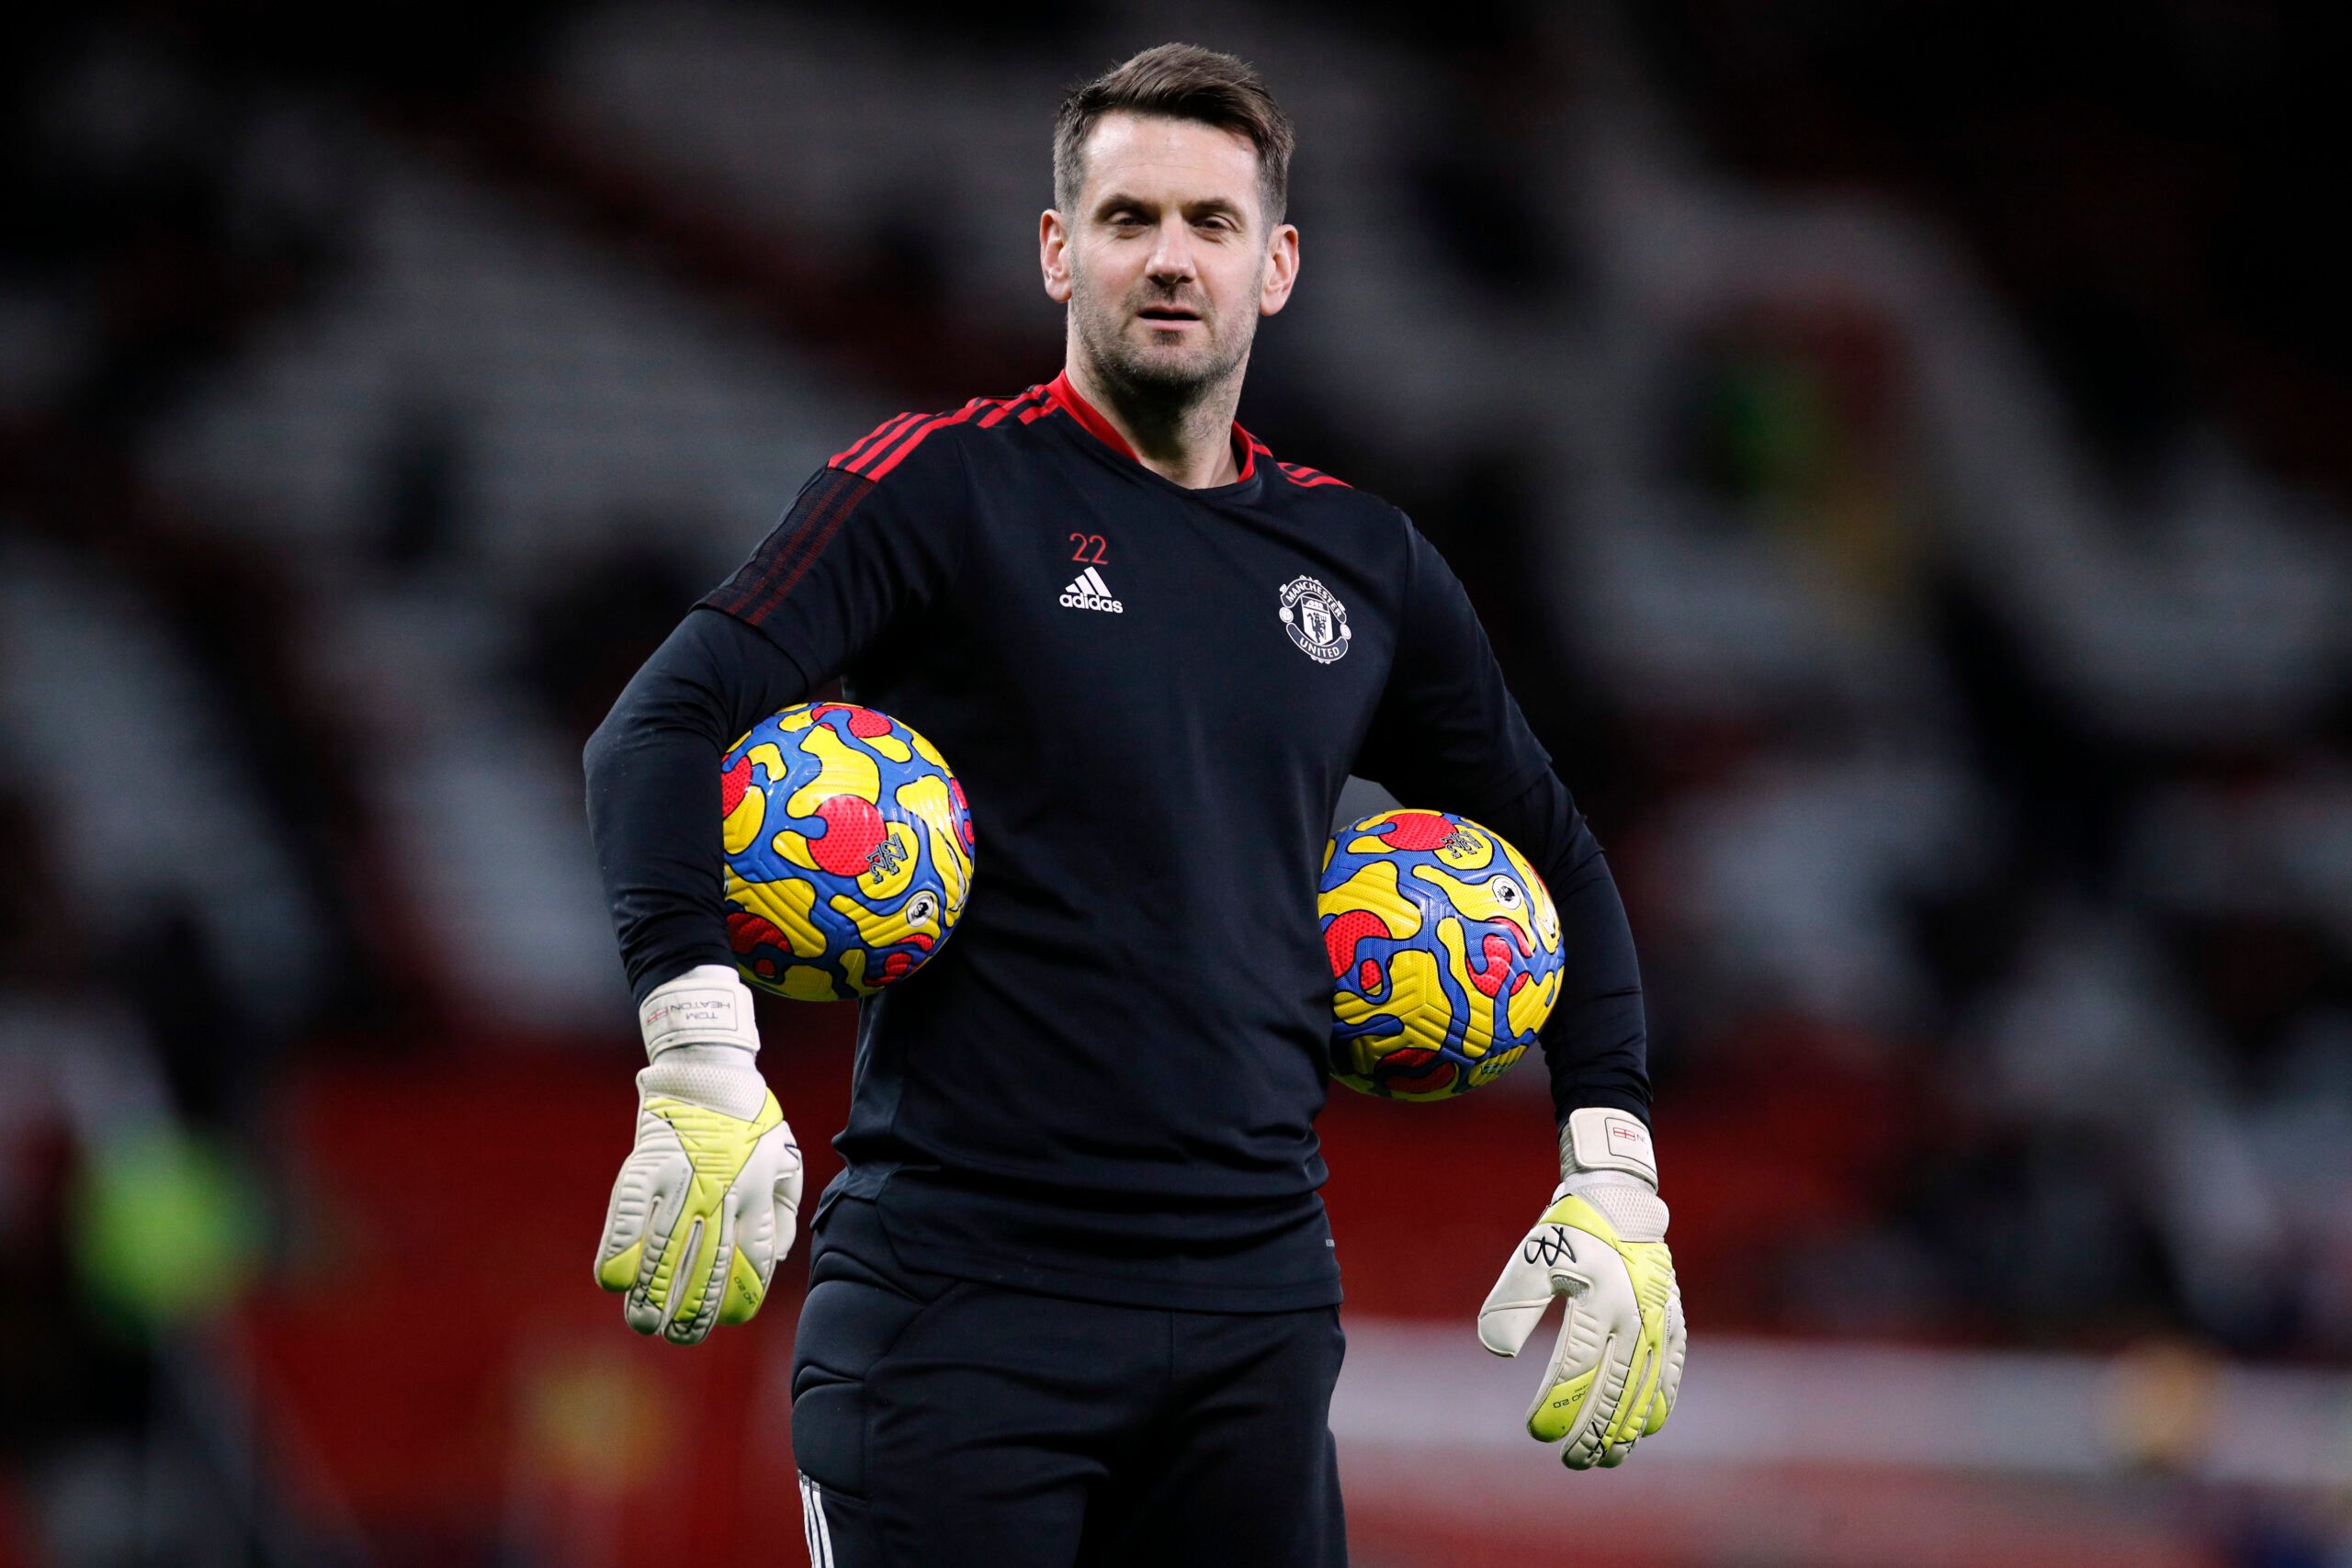 Soccer Football - Premier League - Manchester United v Burnley - Old Trafford, Manchester, Britain - December 30, 2021 Manchester United's Tom Heaton during the warm up before the match REUTERS/Phil Noble EDITORIAL USE ONLY. No use with unauthorized audio, video, data, fixture lists, club/league logos or 'live' services. Online in-match use limited to 75 images, no video emulation. No use in betting, games or single club /league/player publications.  Please contact your account representative fo